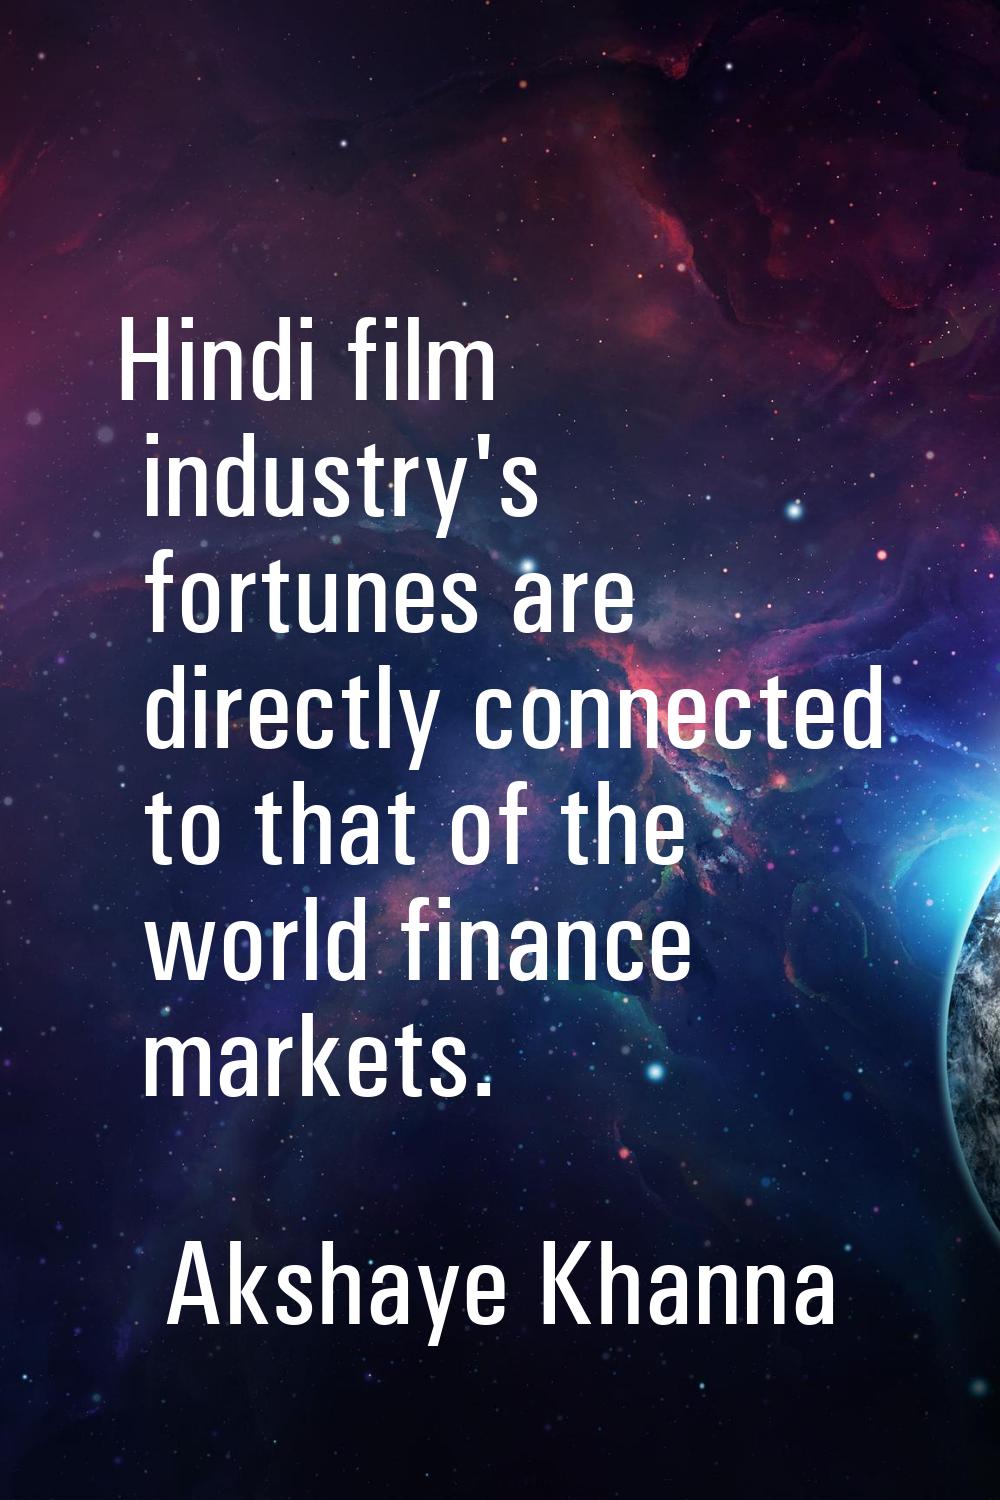 Hindi film industry's fortunes are directly connected to that of the world finance markets.